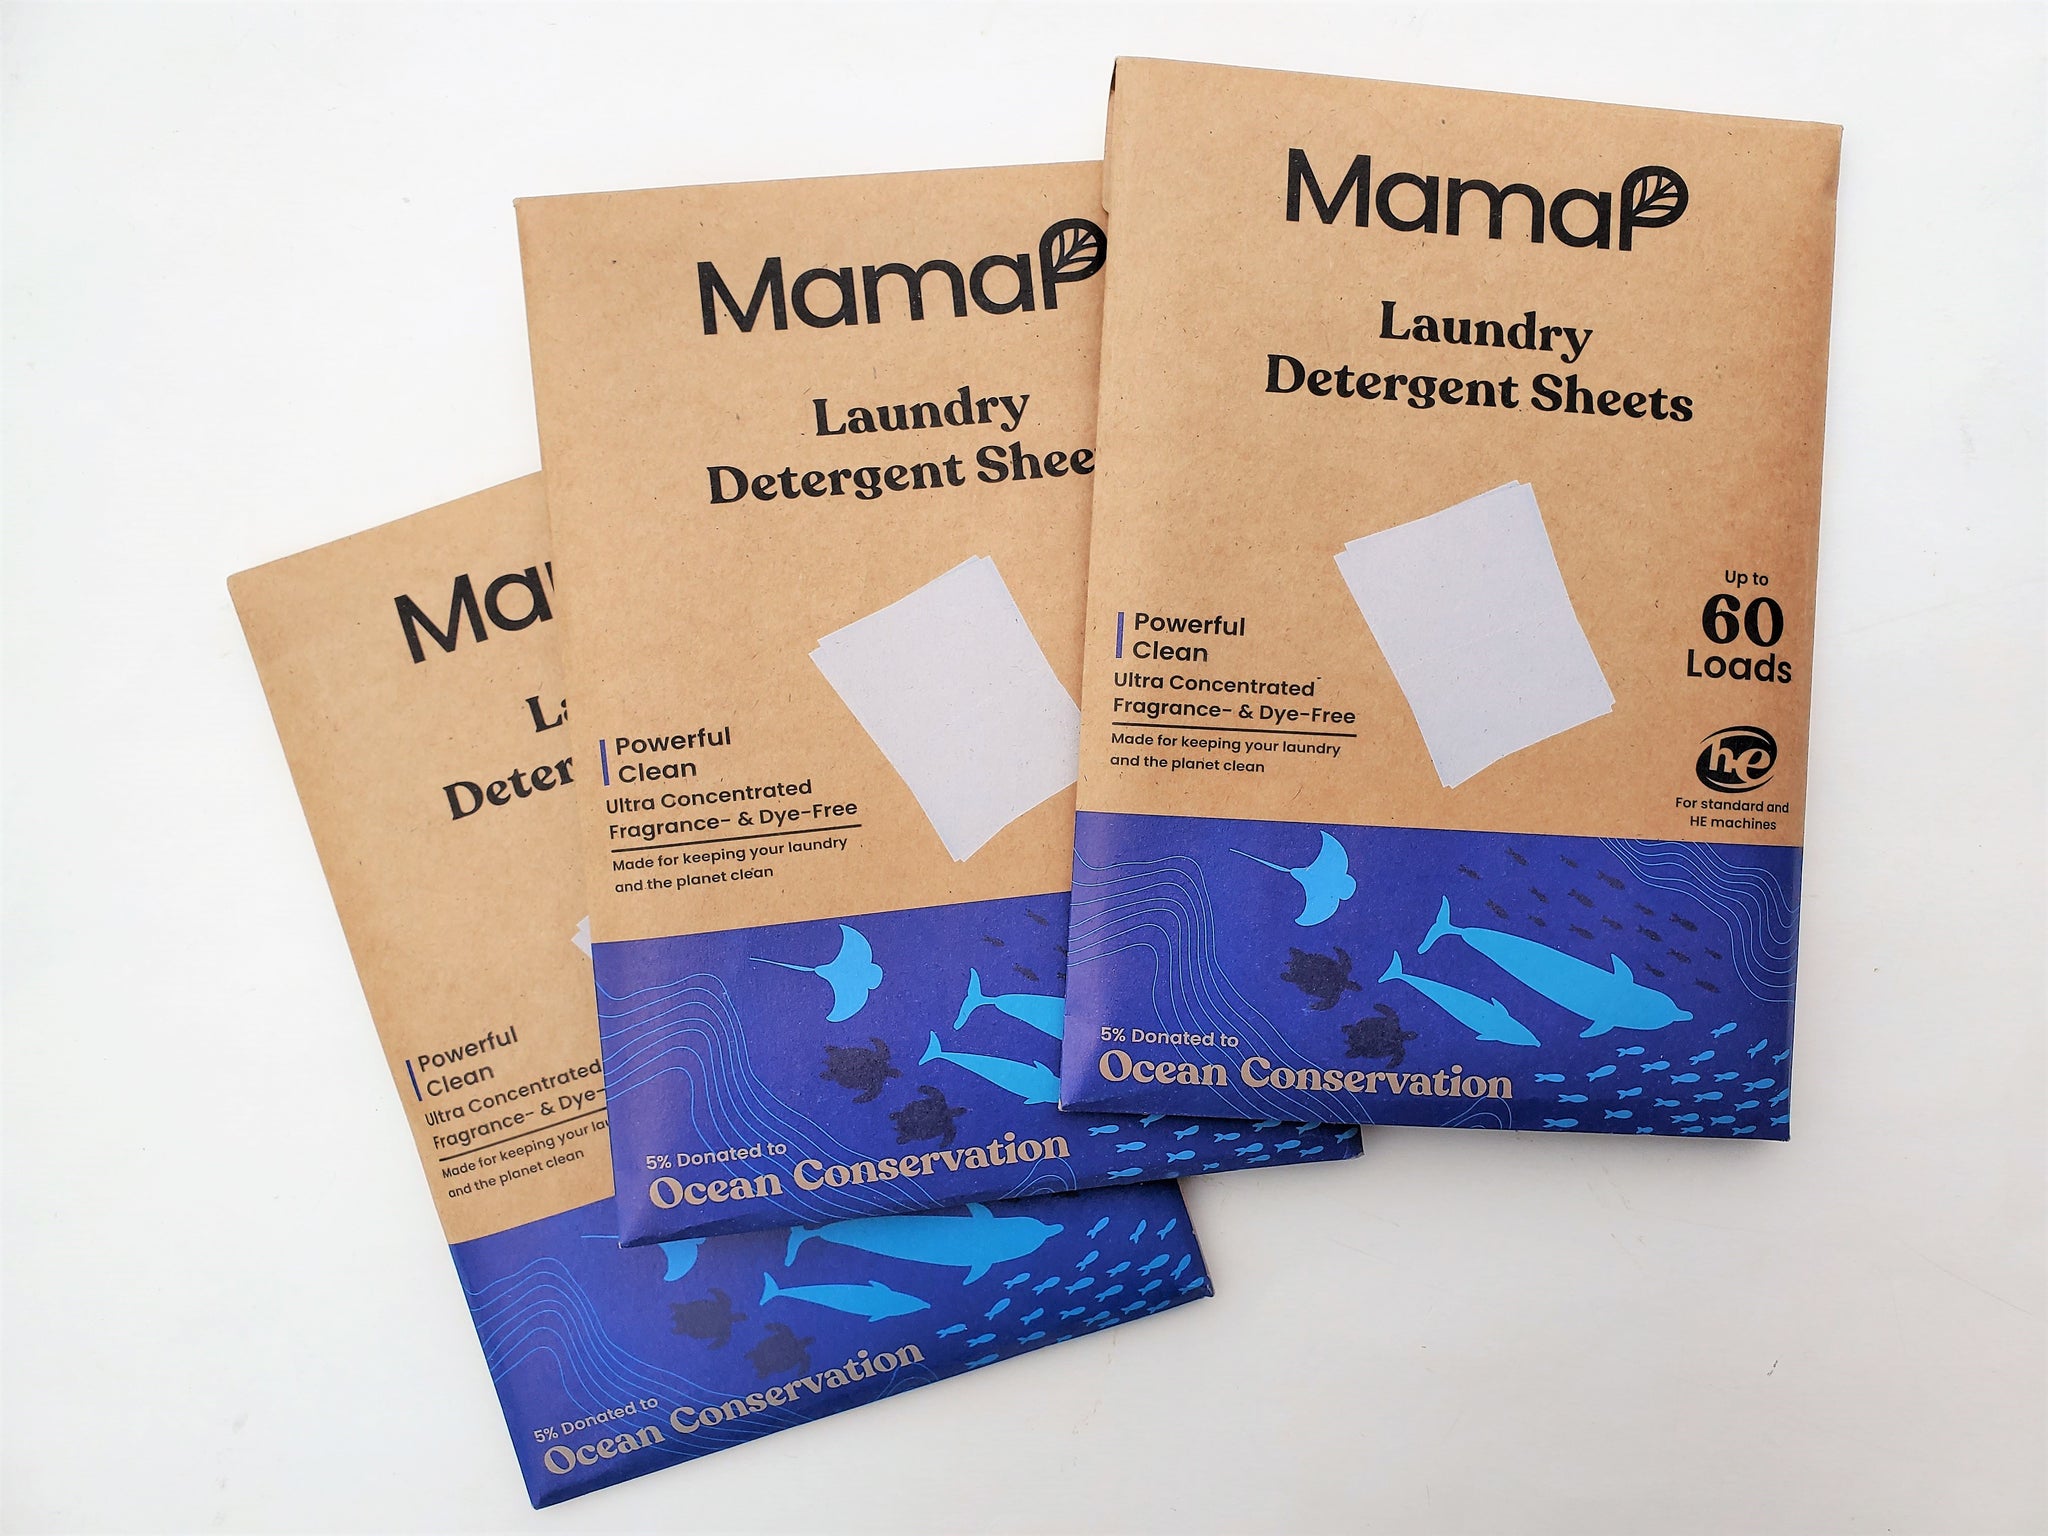 MamaP Laundry Detergent Sheets